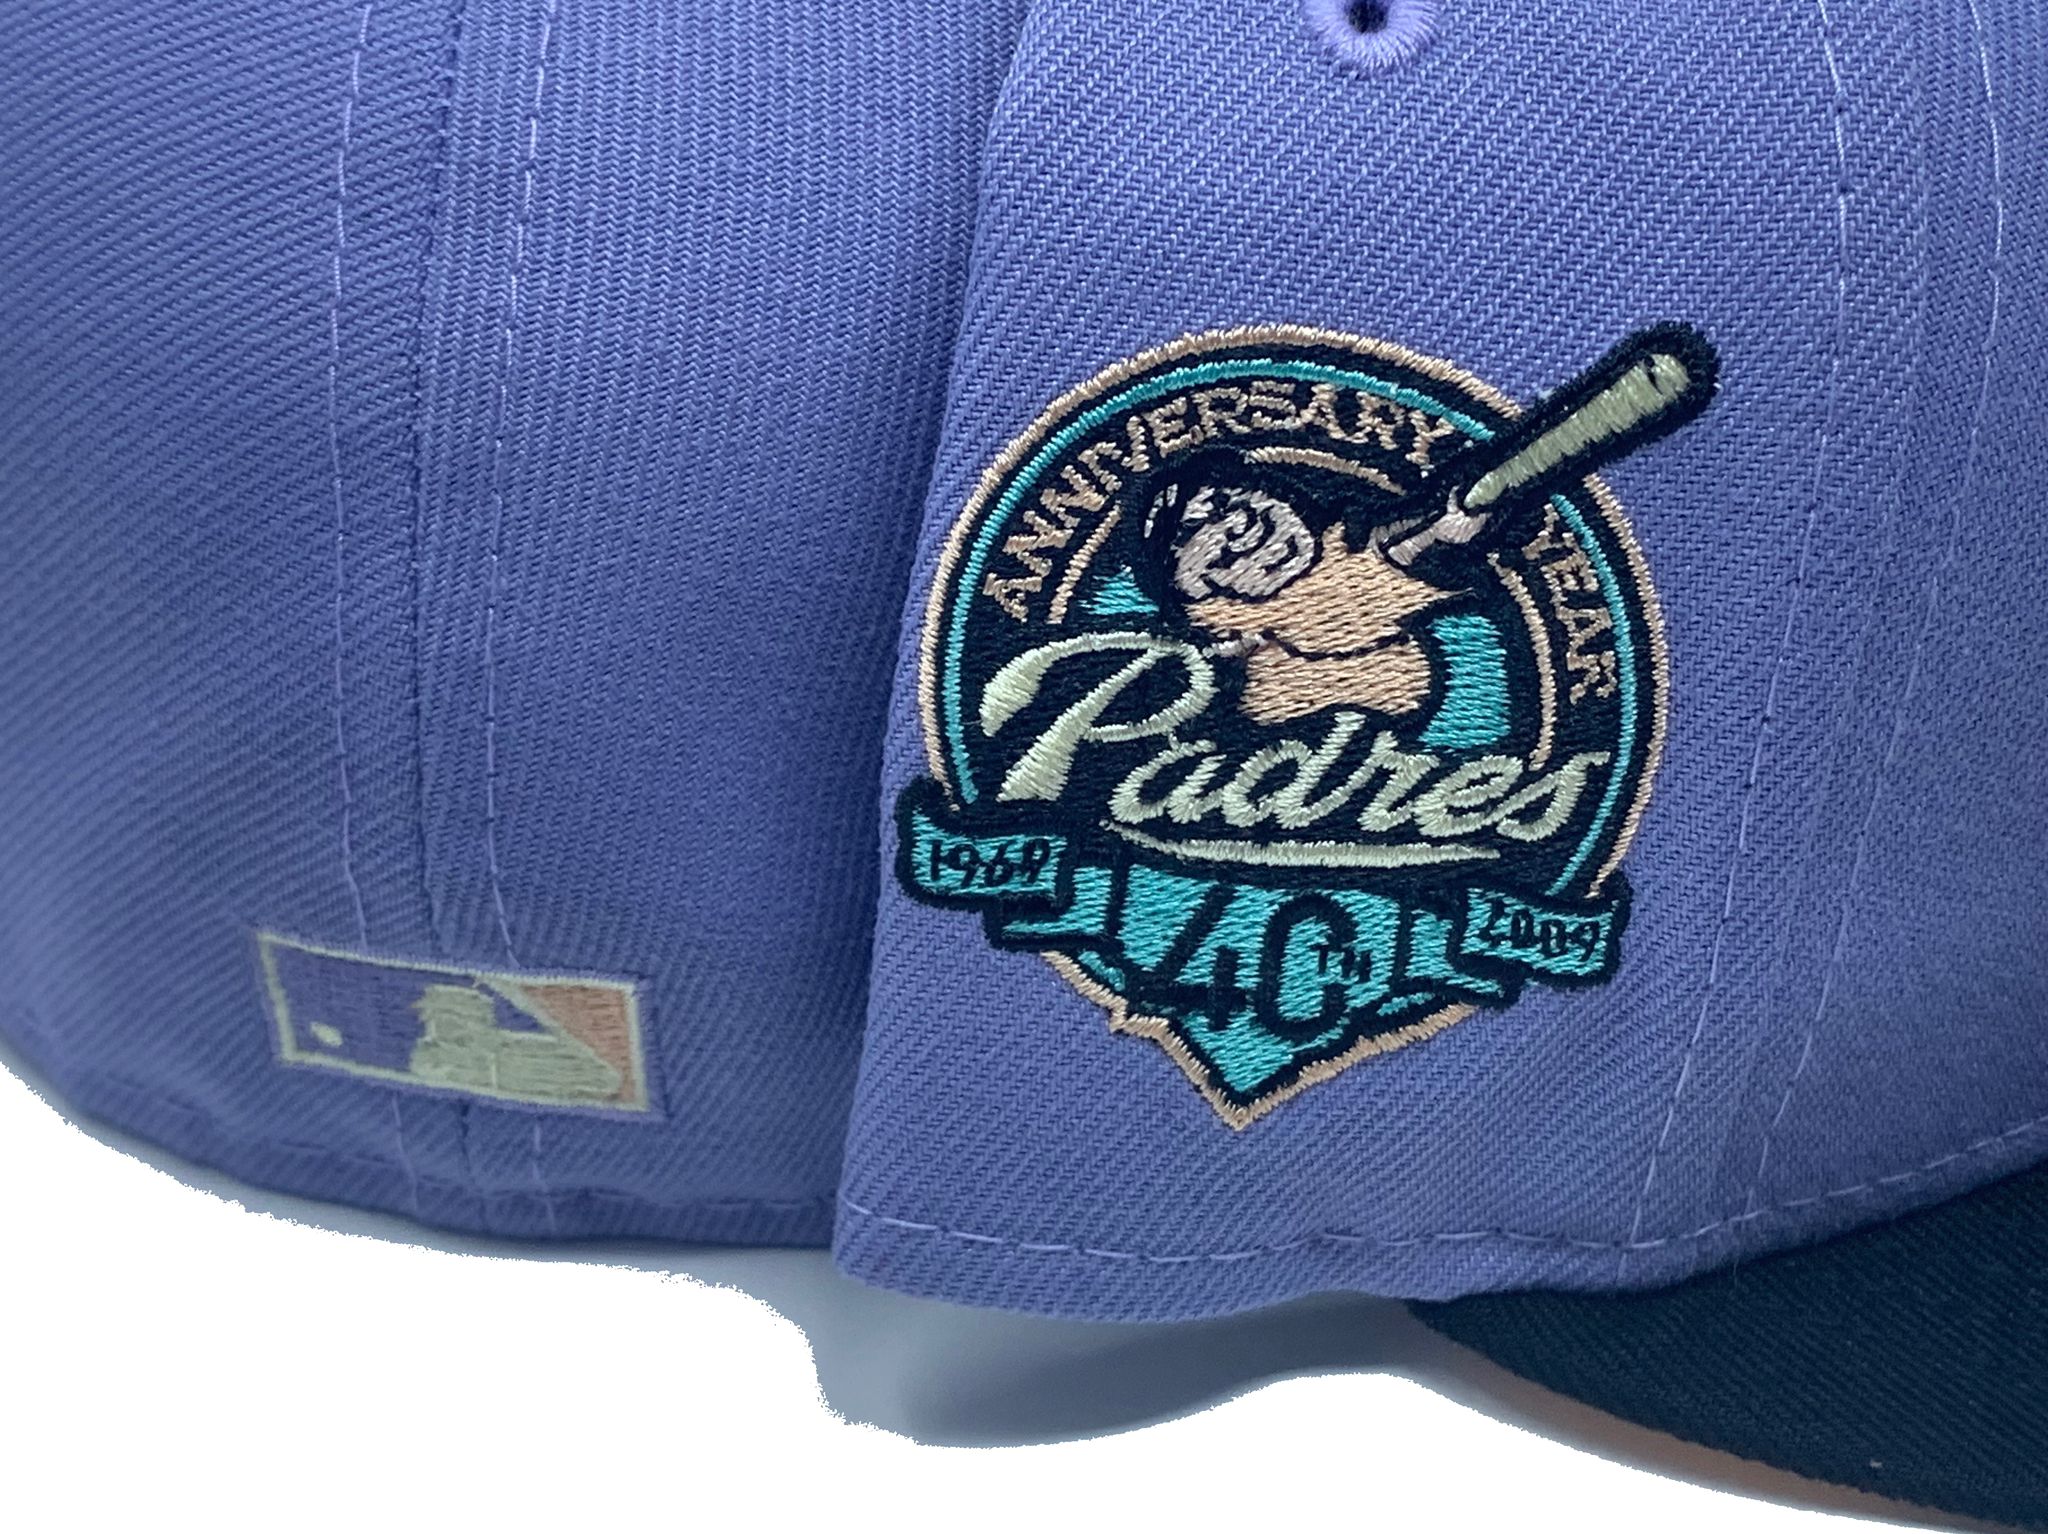 New Era San Diego Padres Capsule Easter Collection 40th